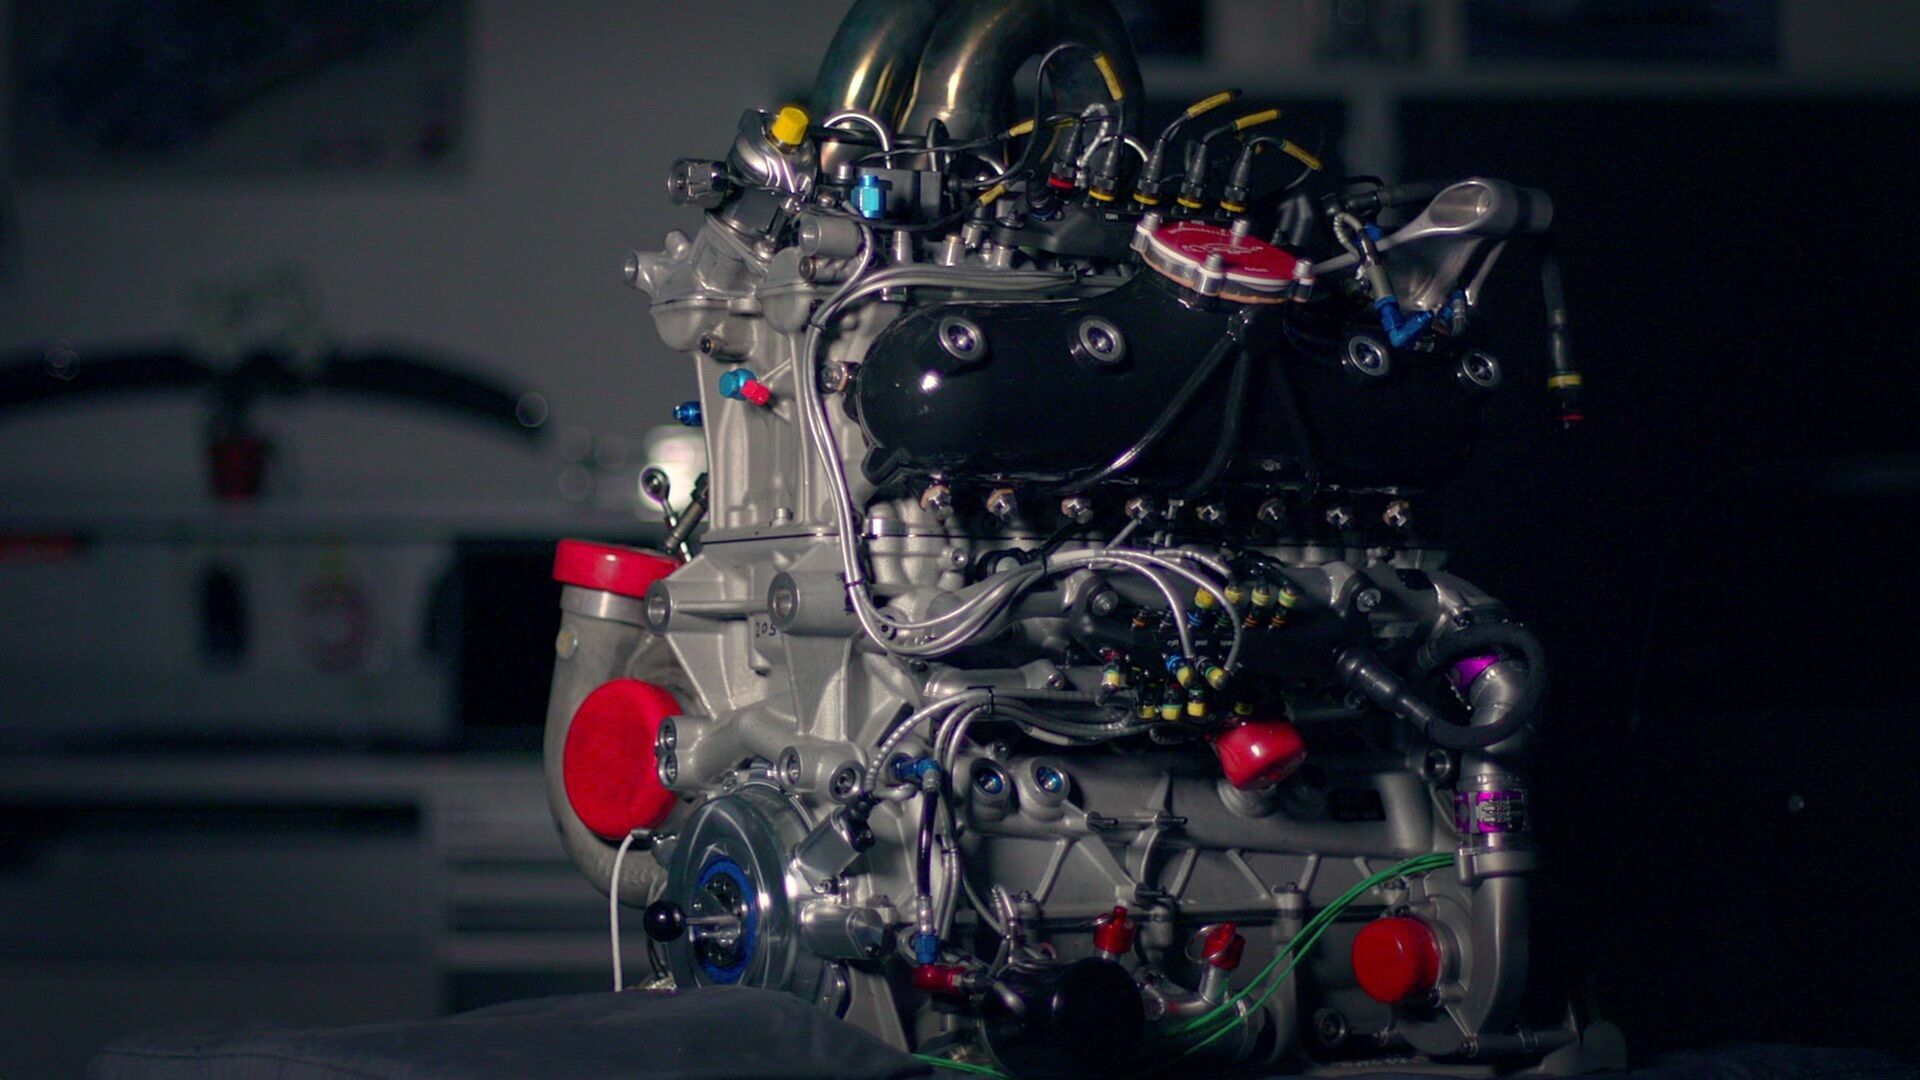 The new Audi turbo engine for the DTM